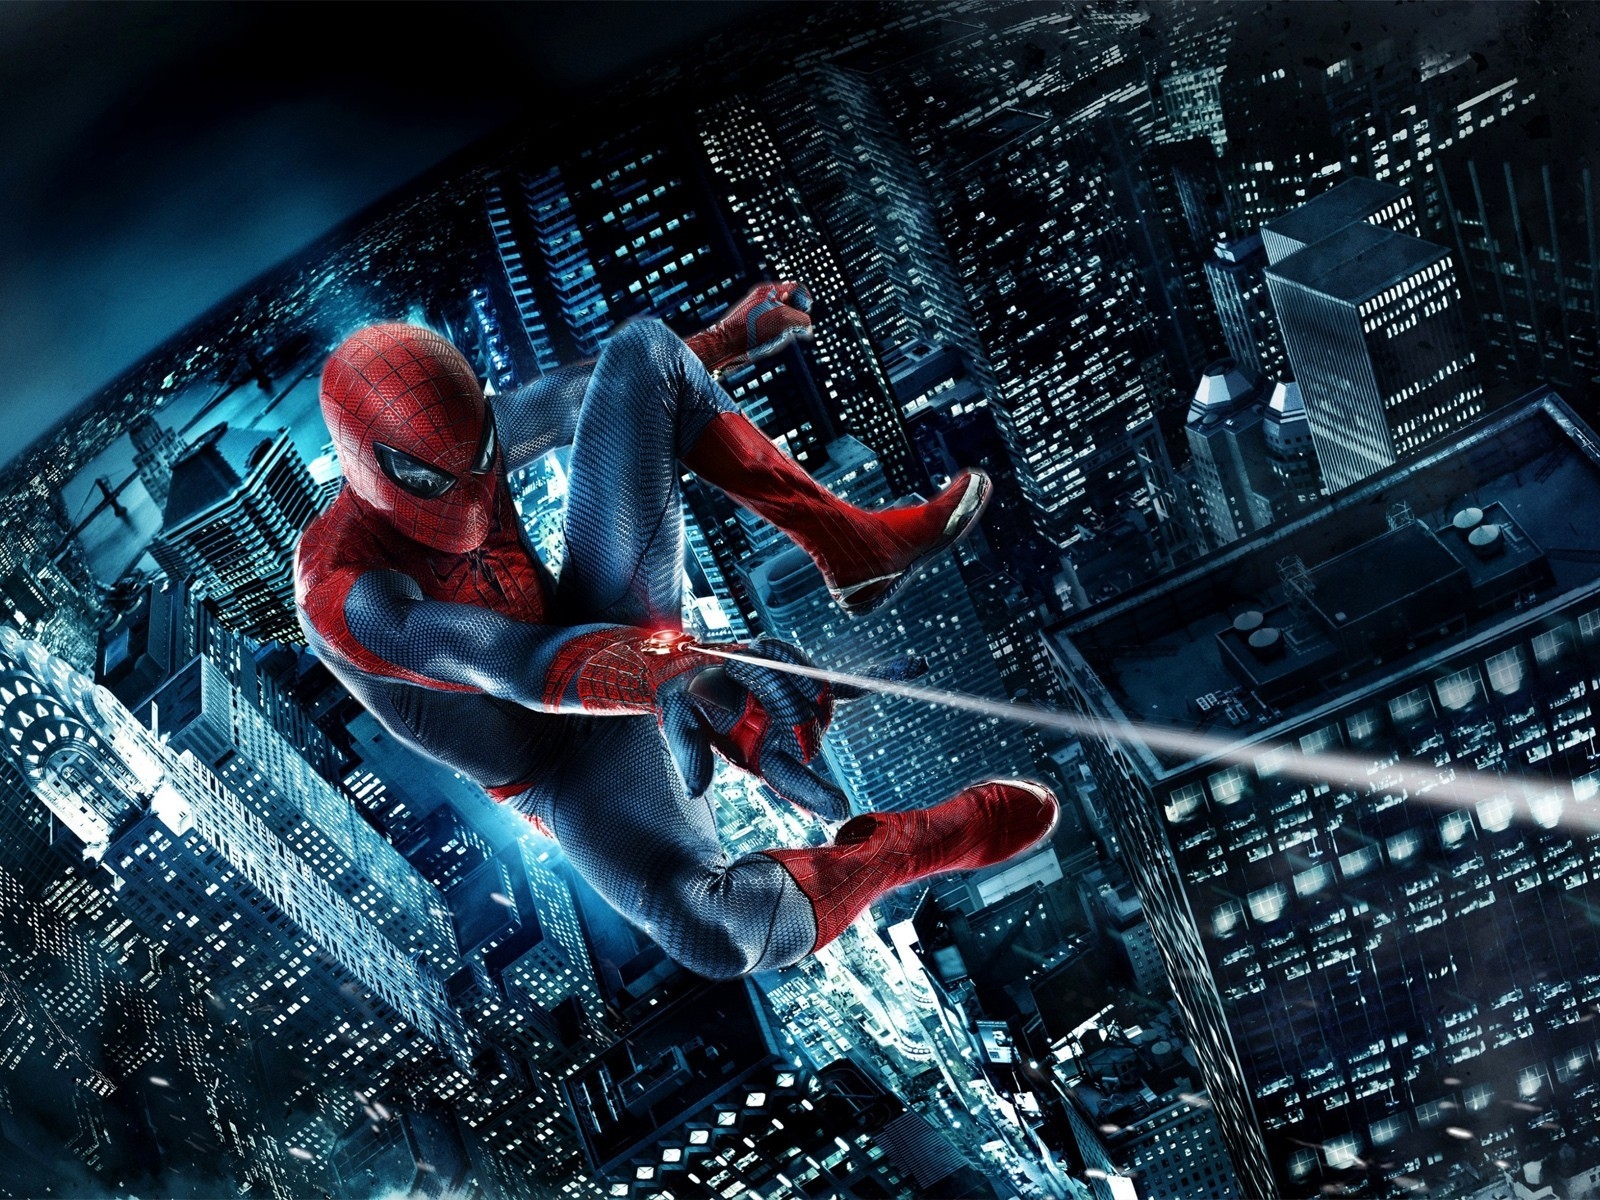 The Amazing SpiderMan 2 for 1600 x 1200 resolution